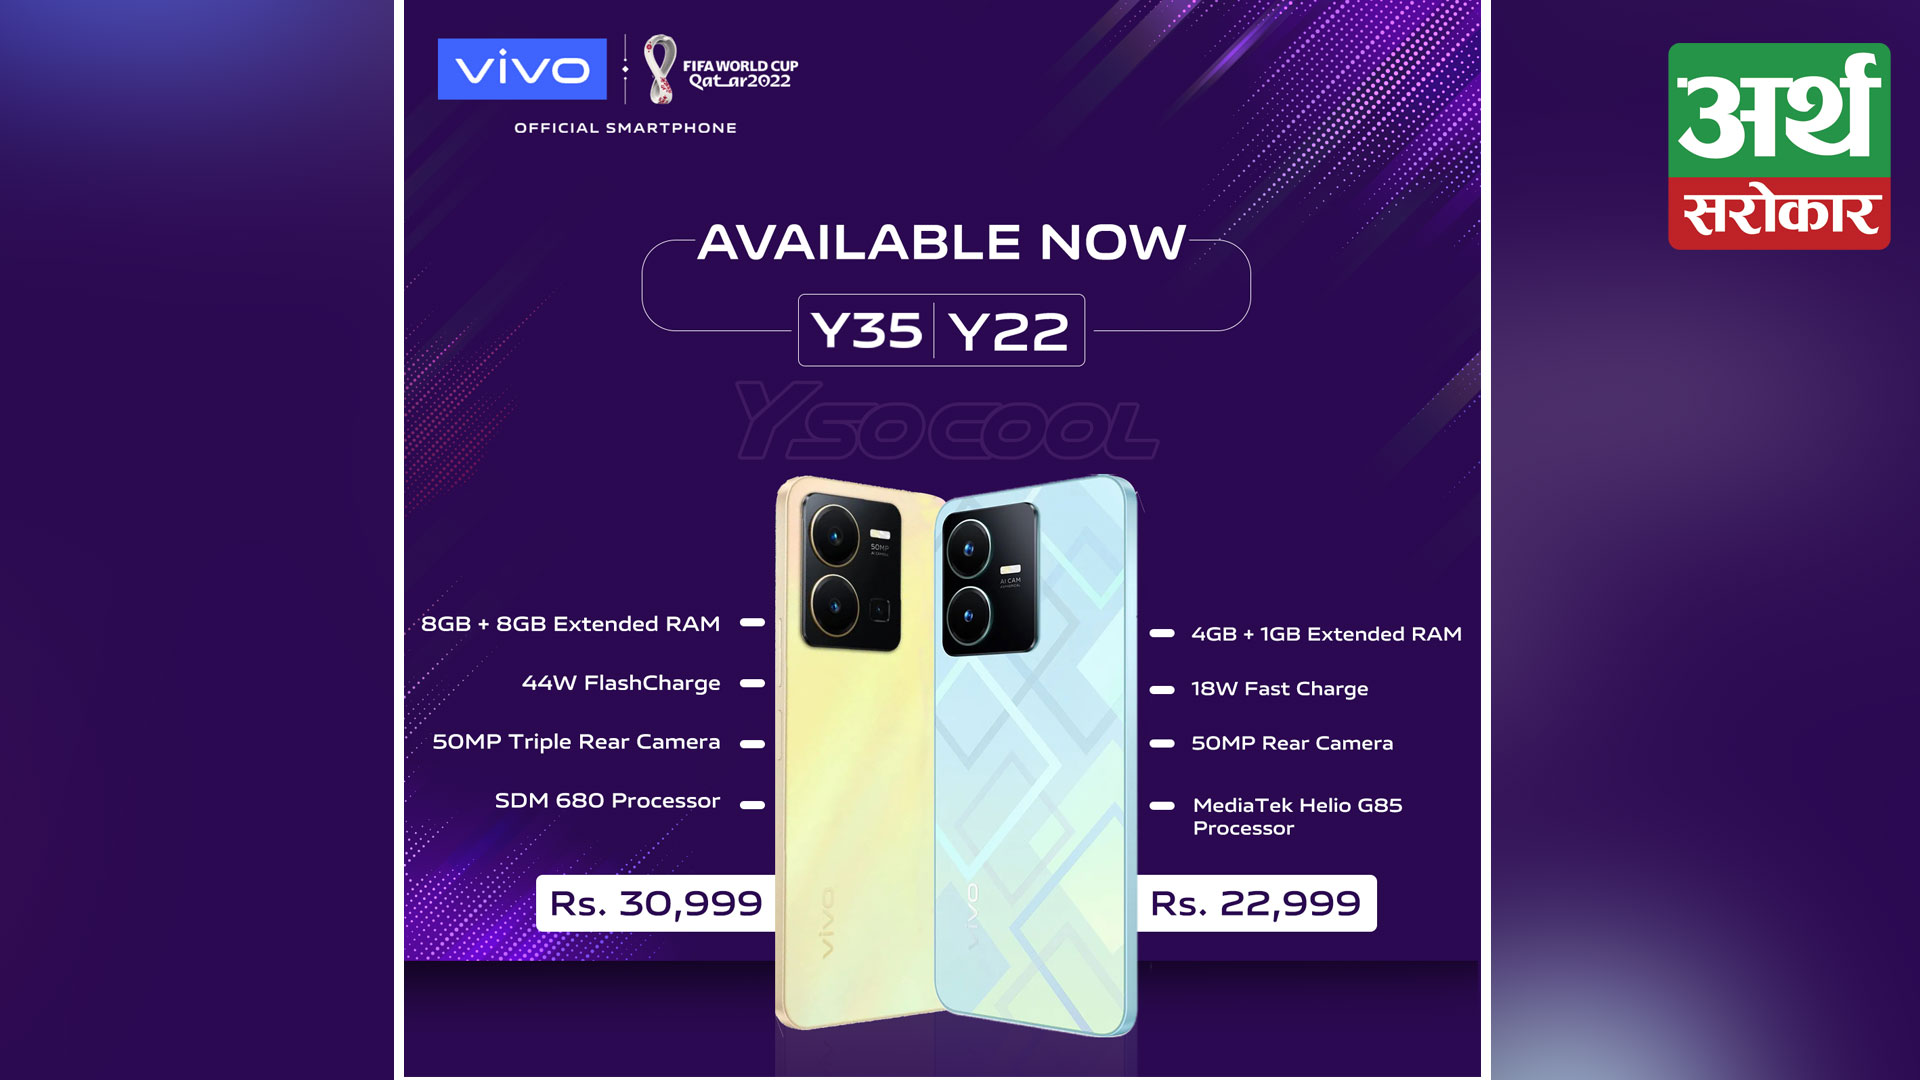 Vivo Y35 and Y22 Launched in Nepal, Offers Amazing Features At Affordable Prices